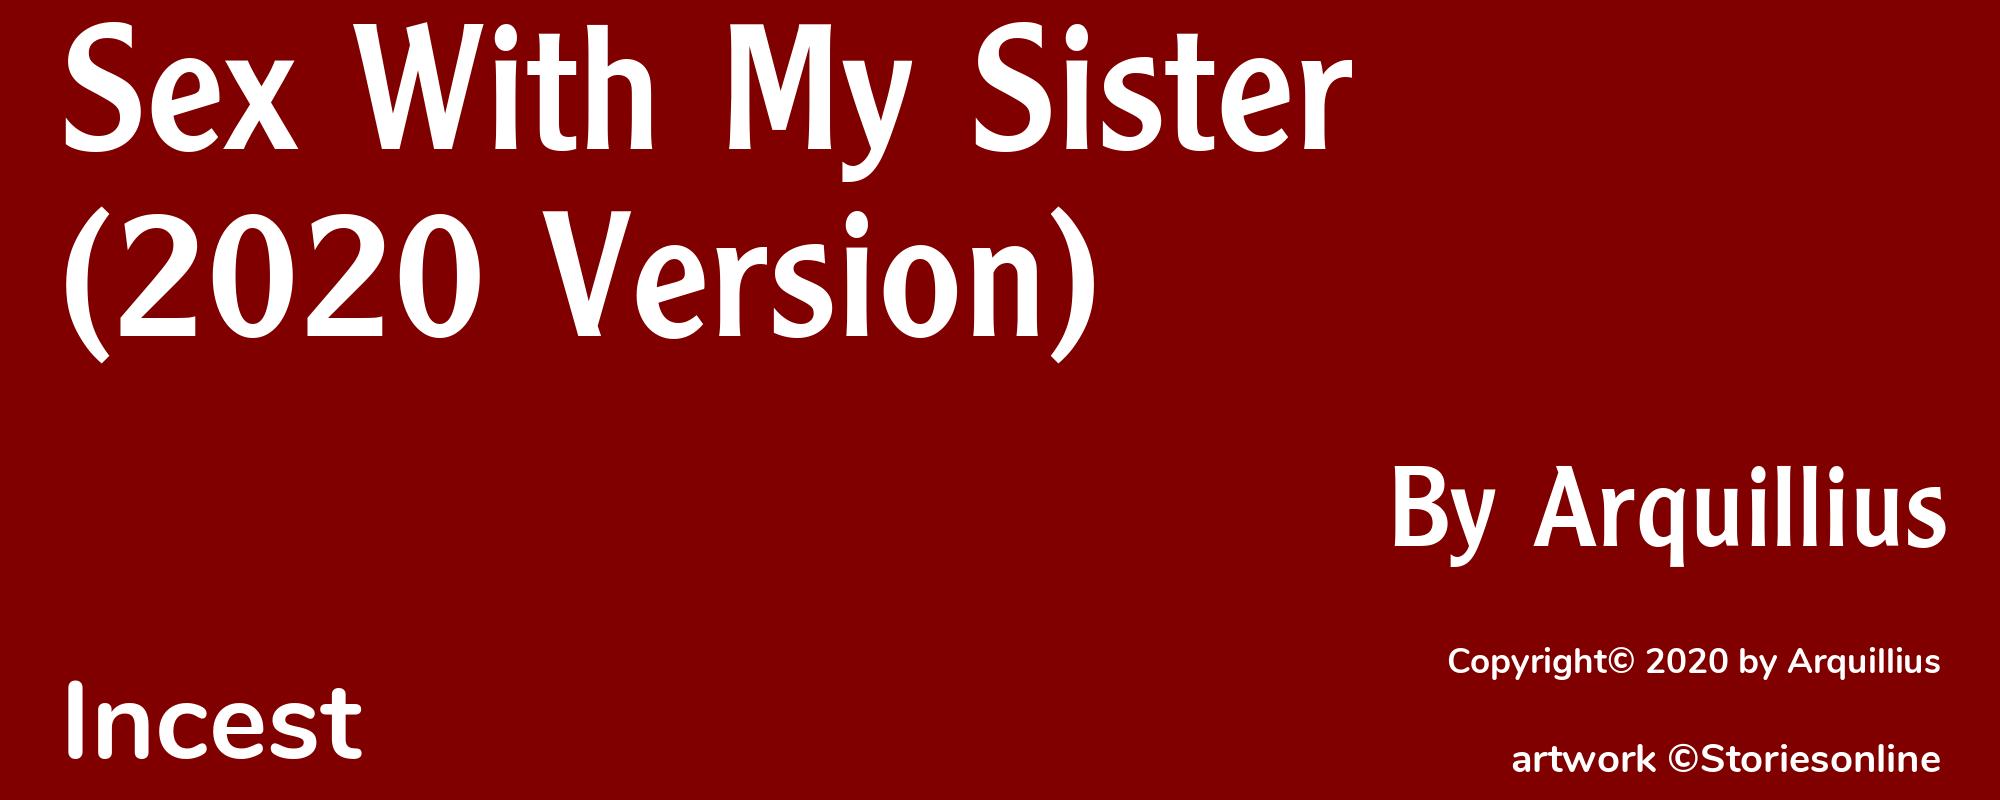 Sex With My Sister (2020 Version) - Cover